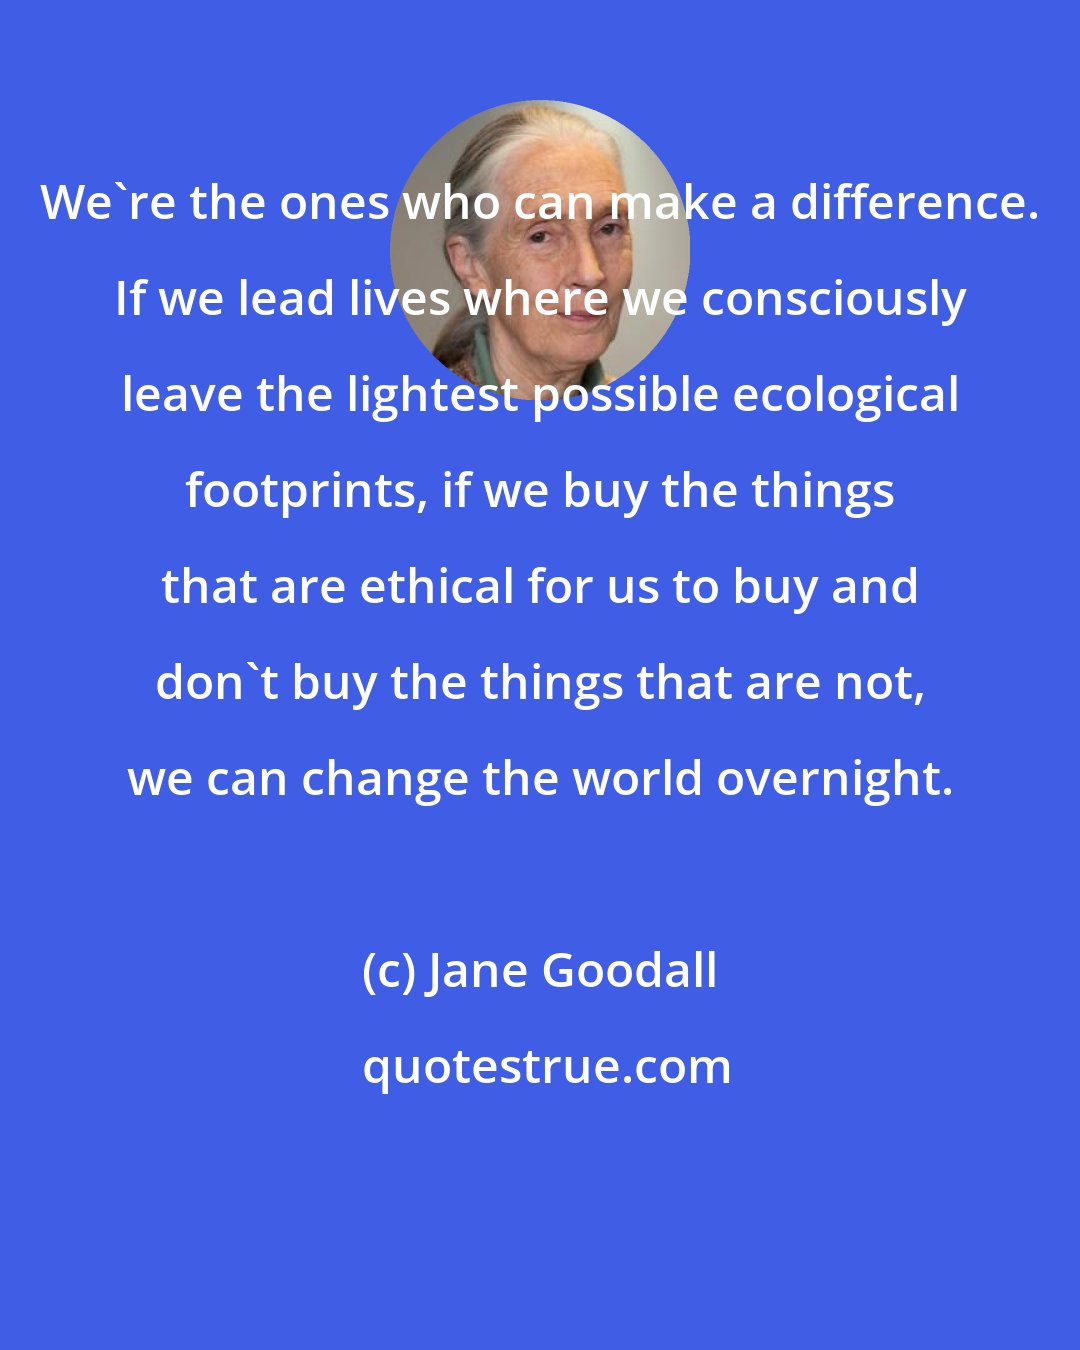 Jane Goodall: We're the ones who can make a difference. If we lead lives where we consciously leave the lightest possible ecological footprints, if we buy the things that are ethical for us to buy and don't buy the things that are not, we can change the world overnight.